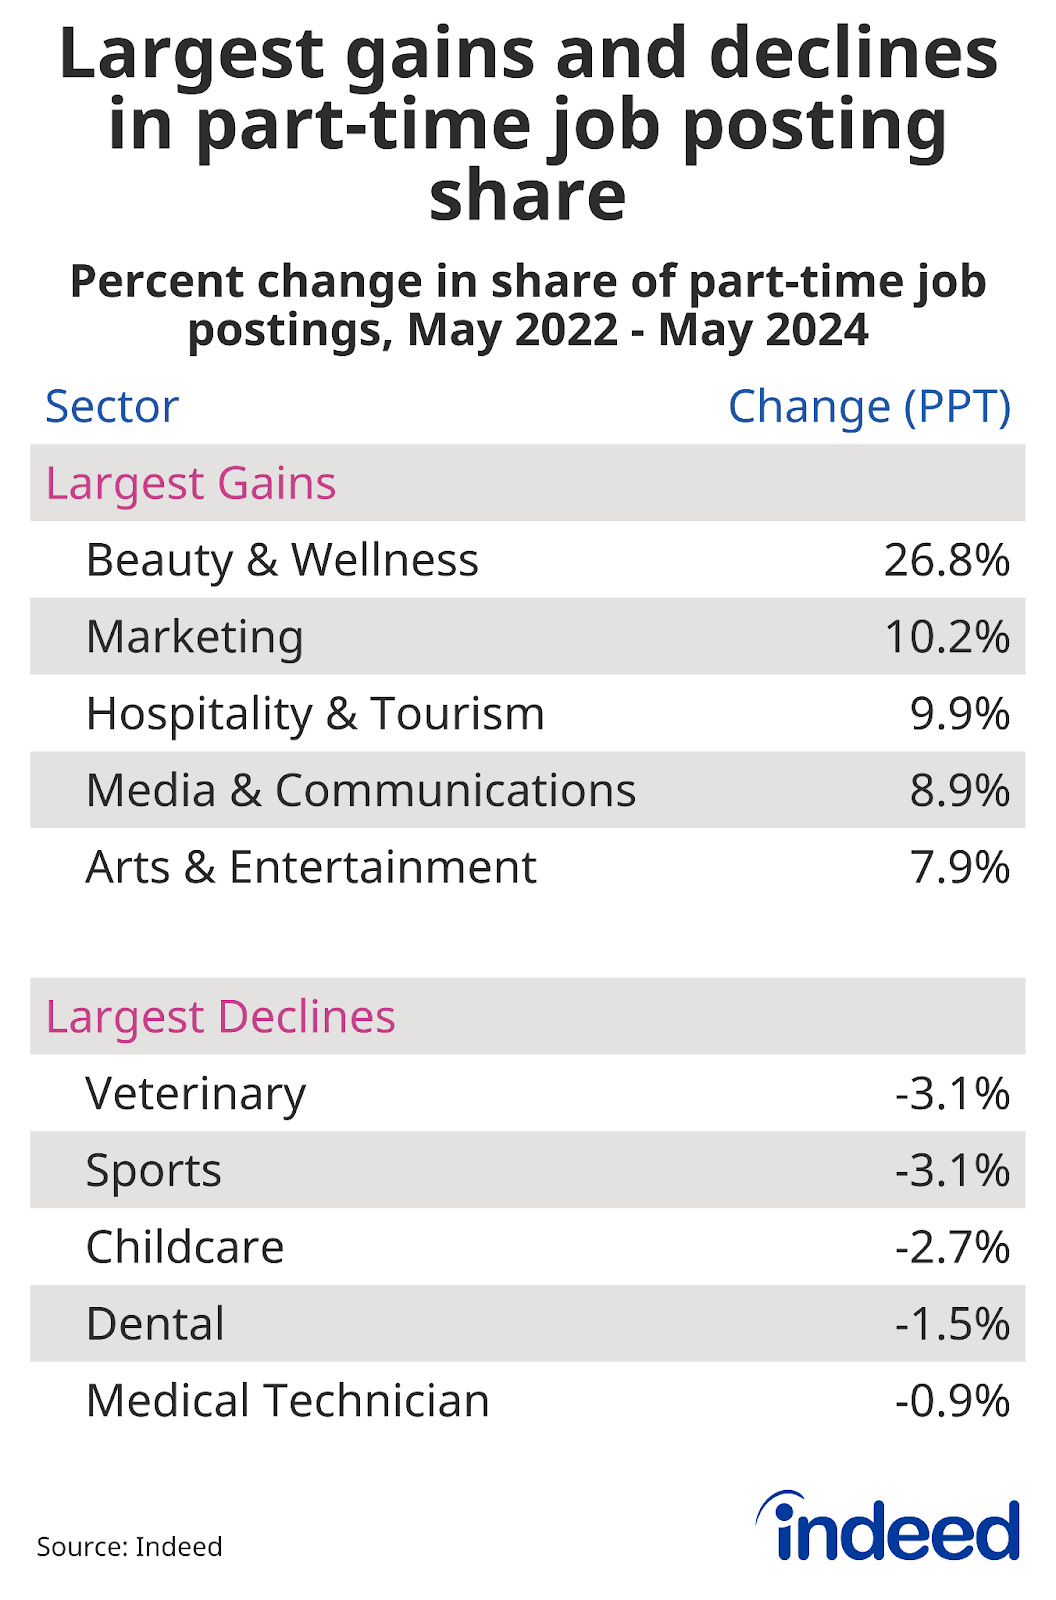 Table showing sectors with the largest gain and decline in the share of part-time job postings from May 2022 to May 2024. The share of part-time job postings in the Beauty & Wellness sector grew by 26.8 percentage points. 